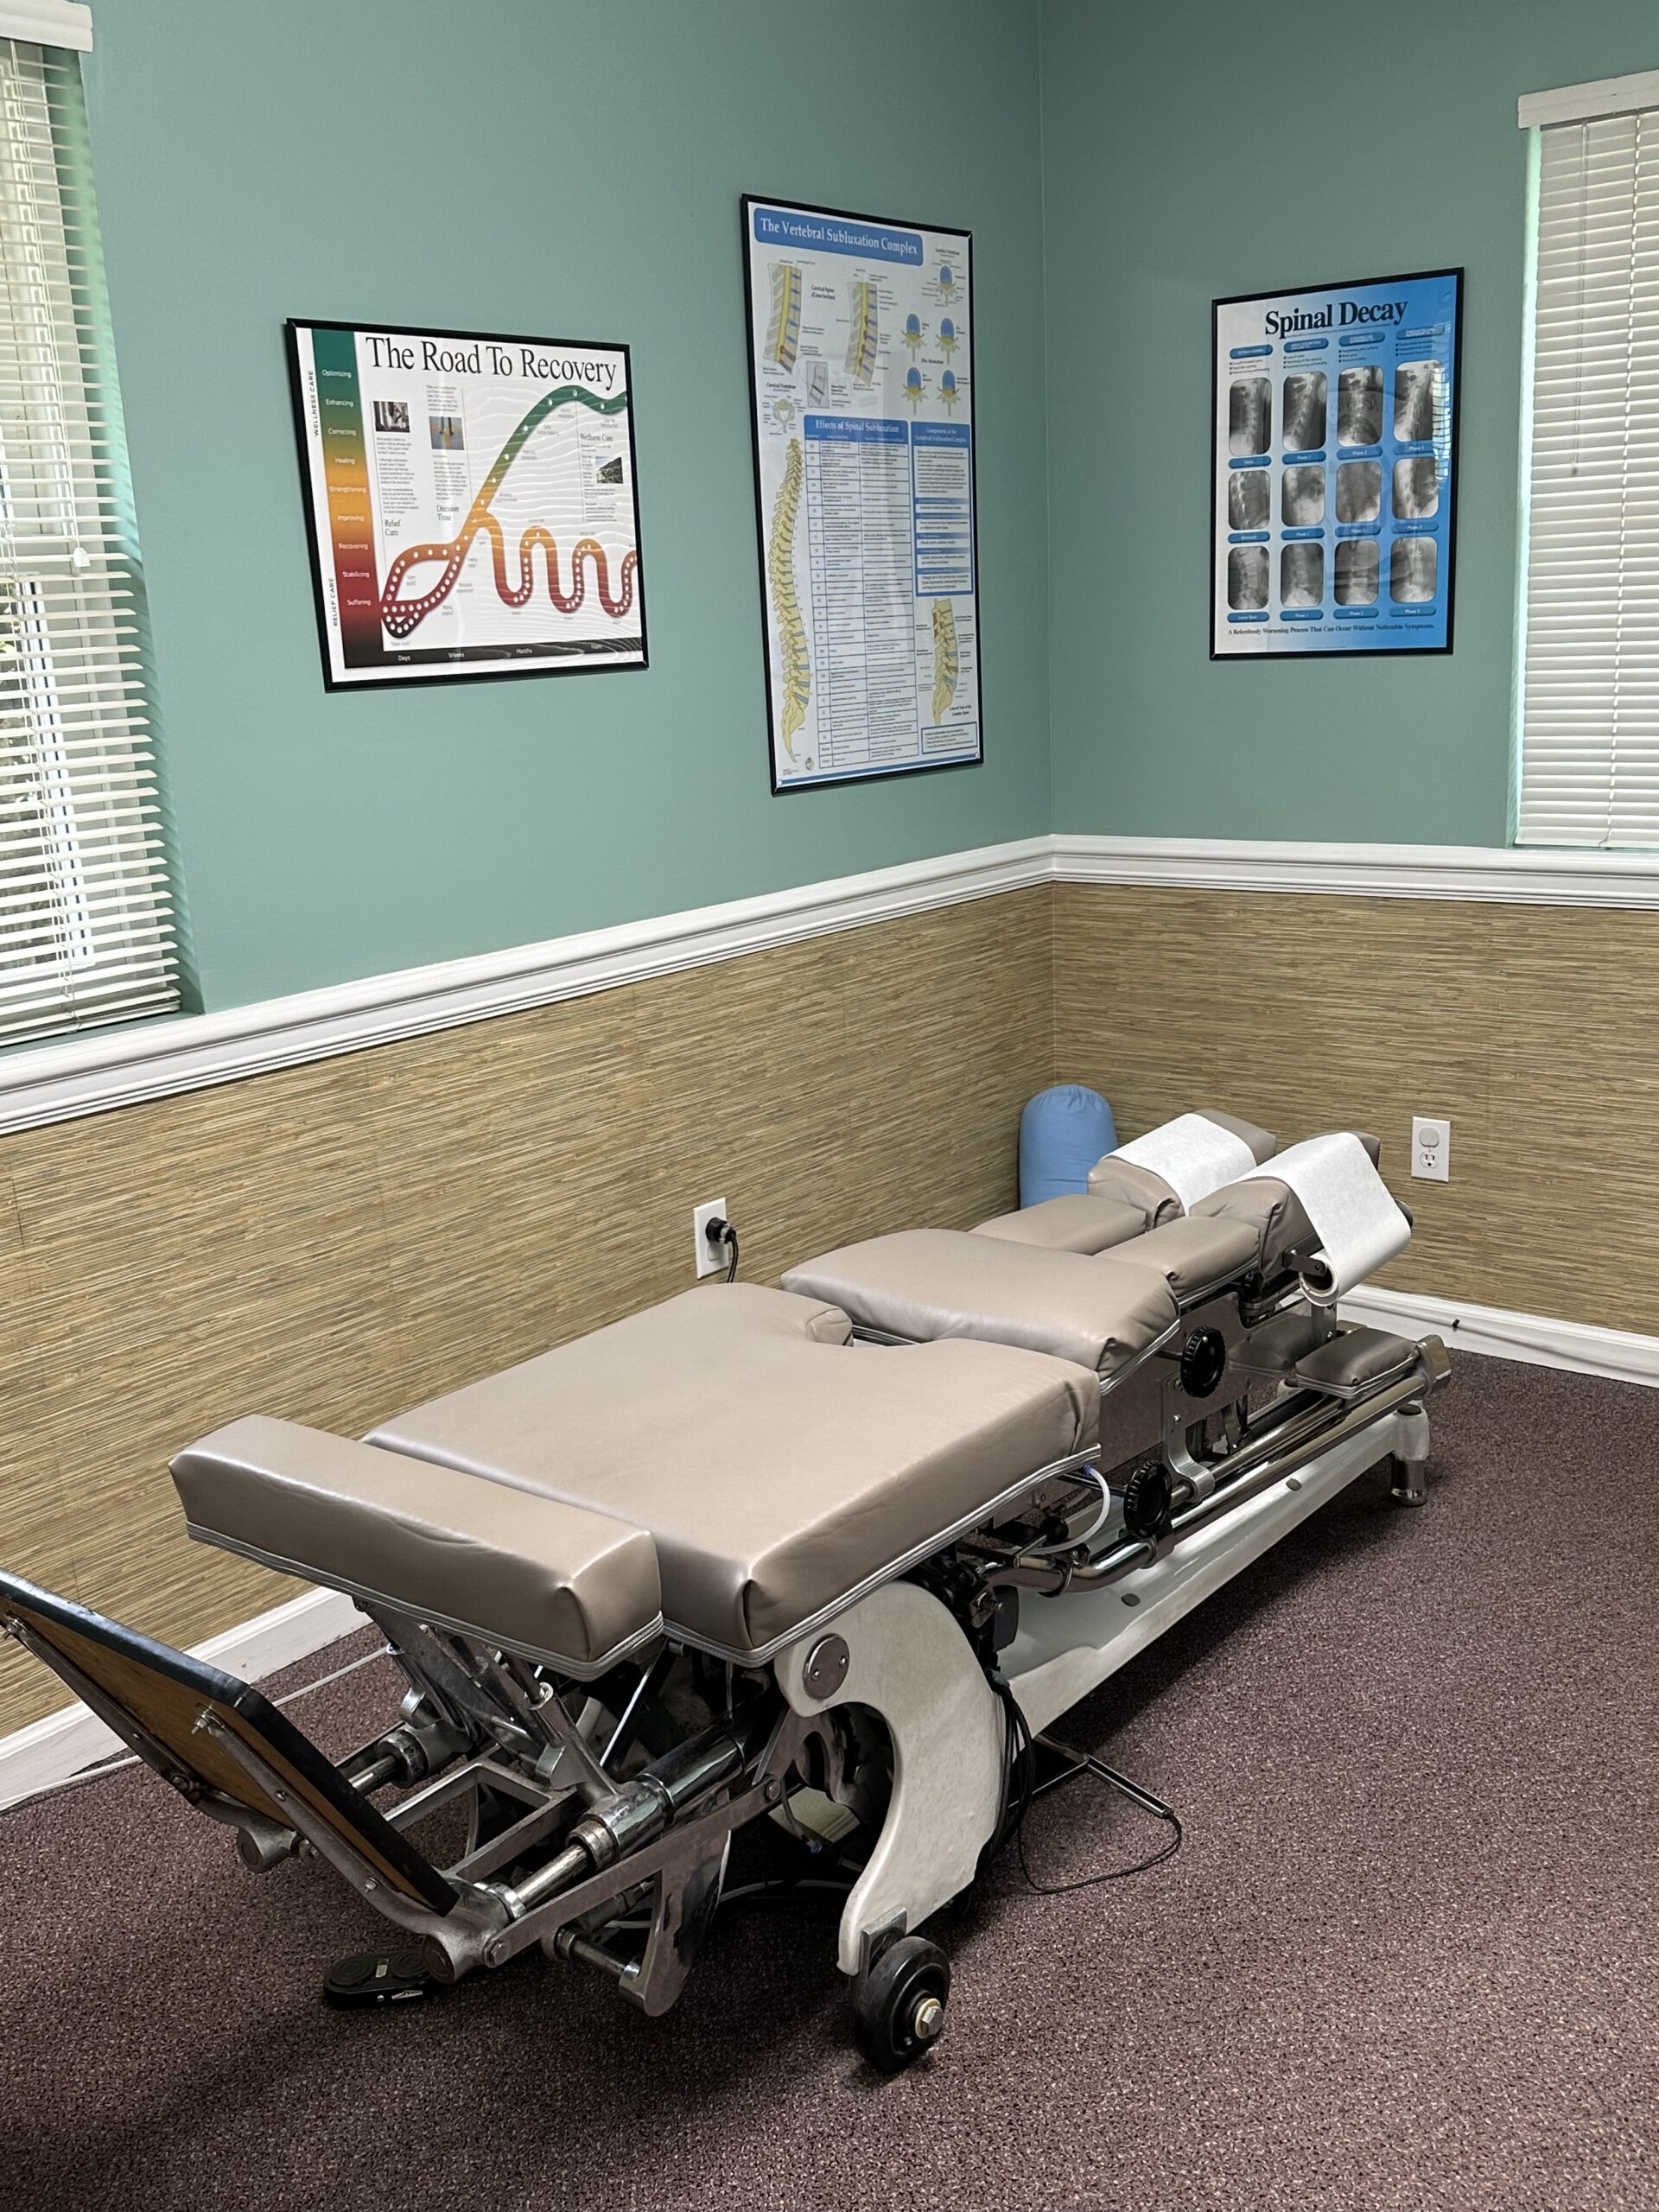 Tan chiropractic table laid flat in teal room.